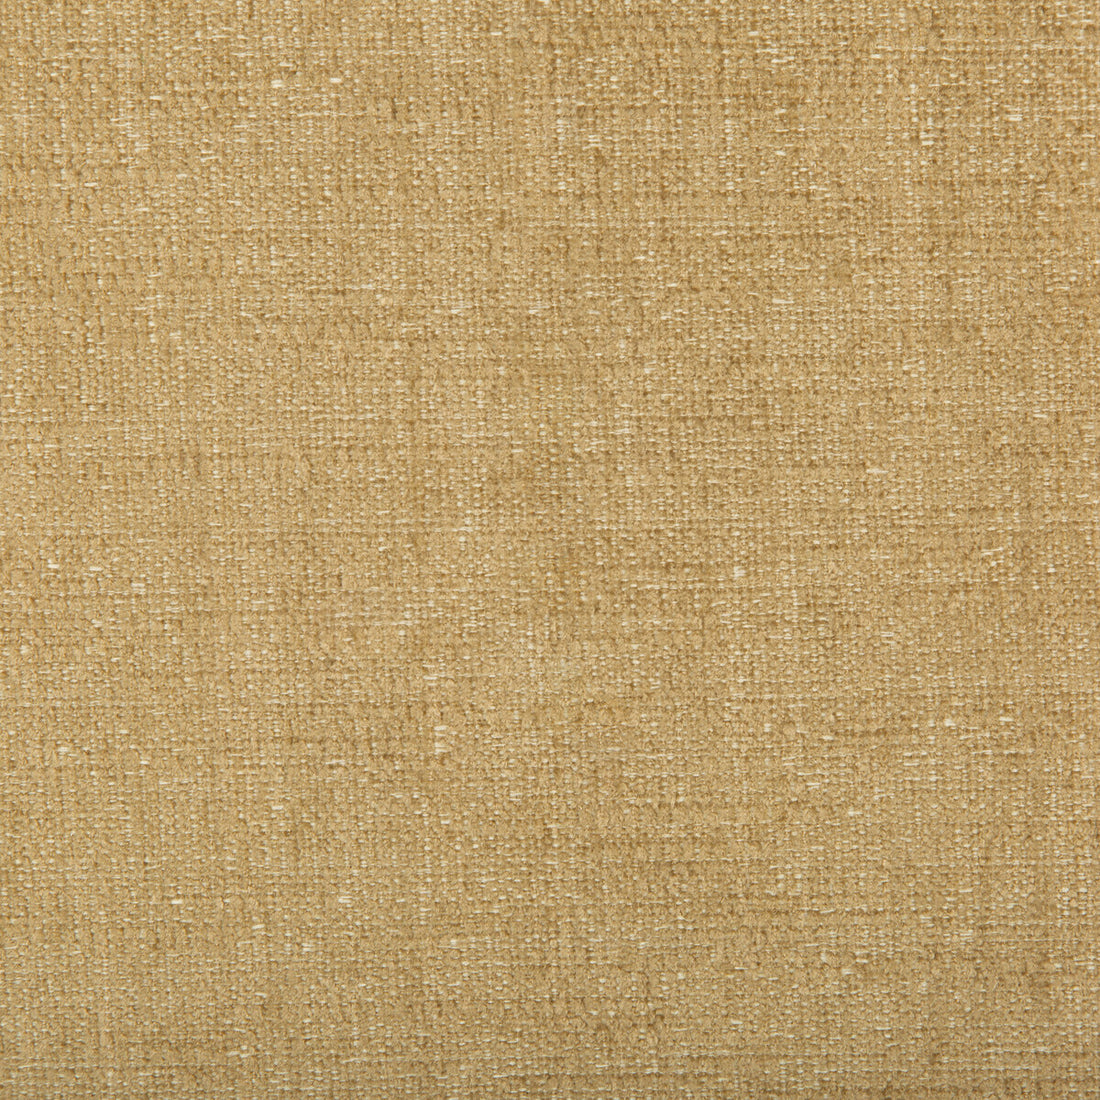 Kravet Contract fabric in 34636-1616 color - pattern 34636.1616.0 - by Kravet Contract in the Crypton Incase collection